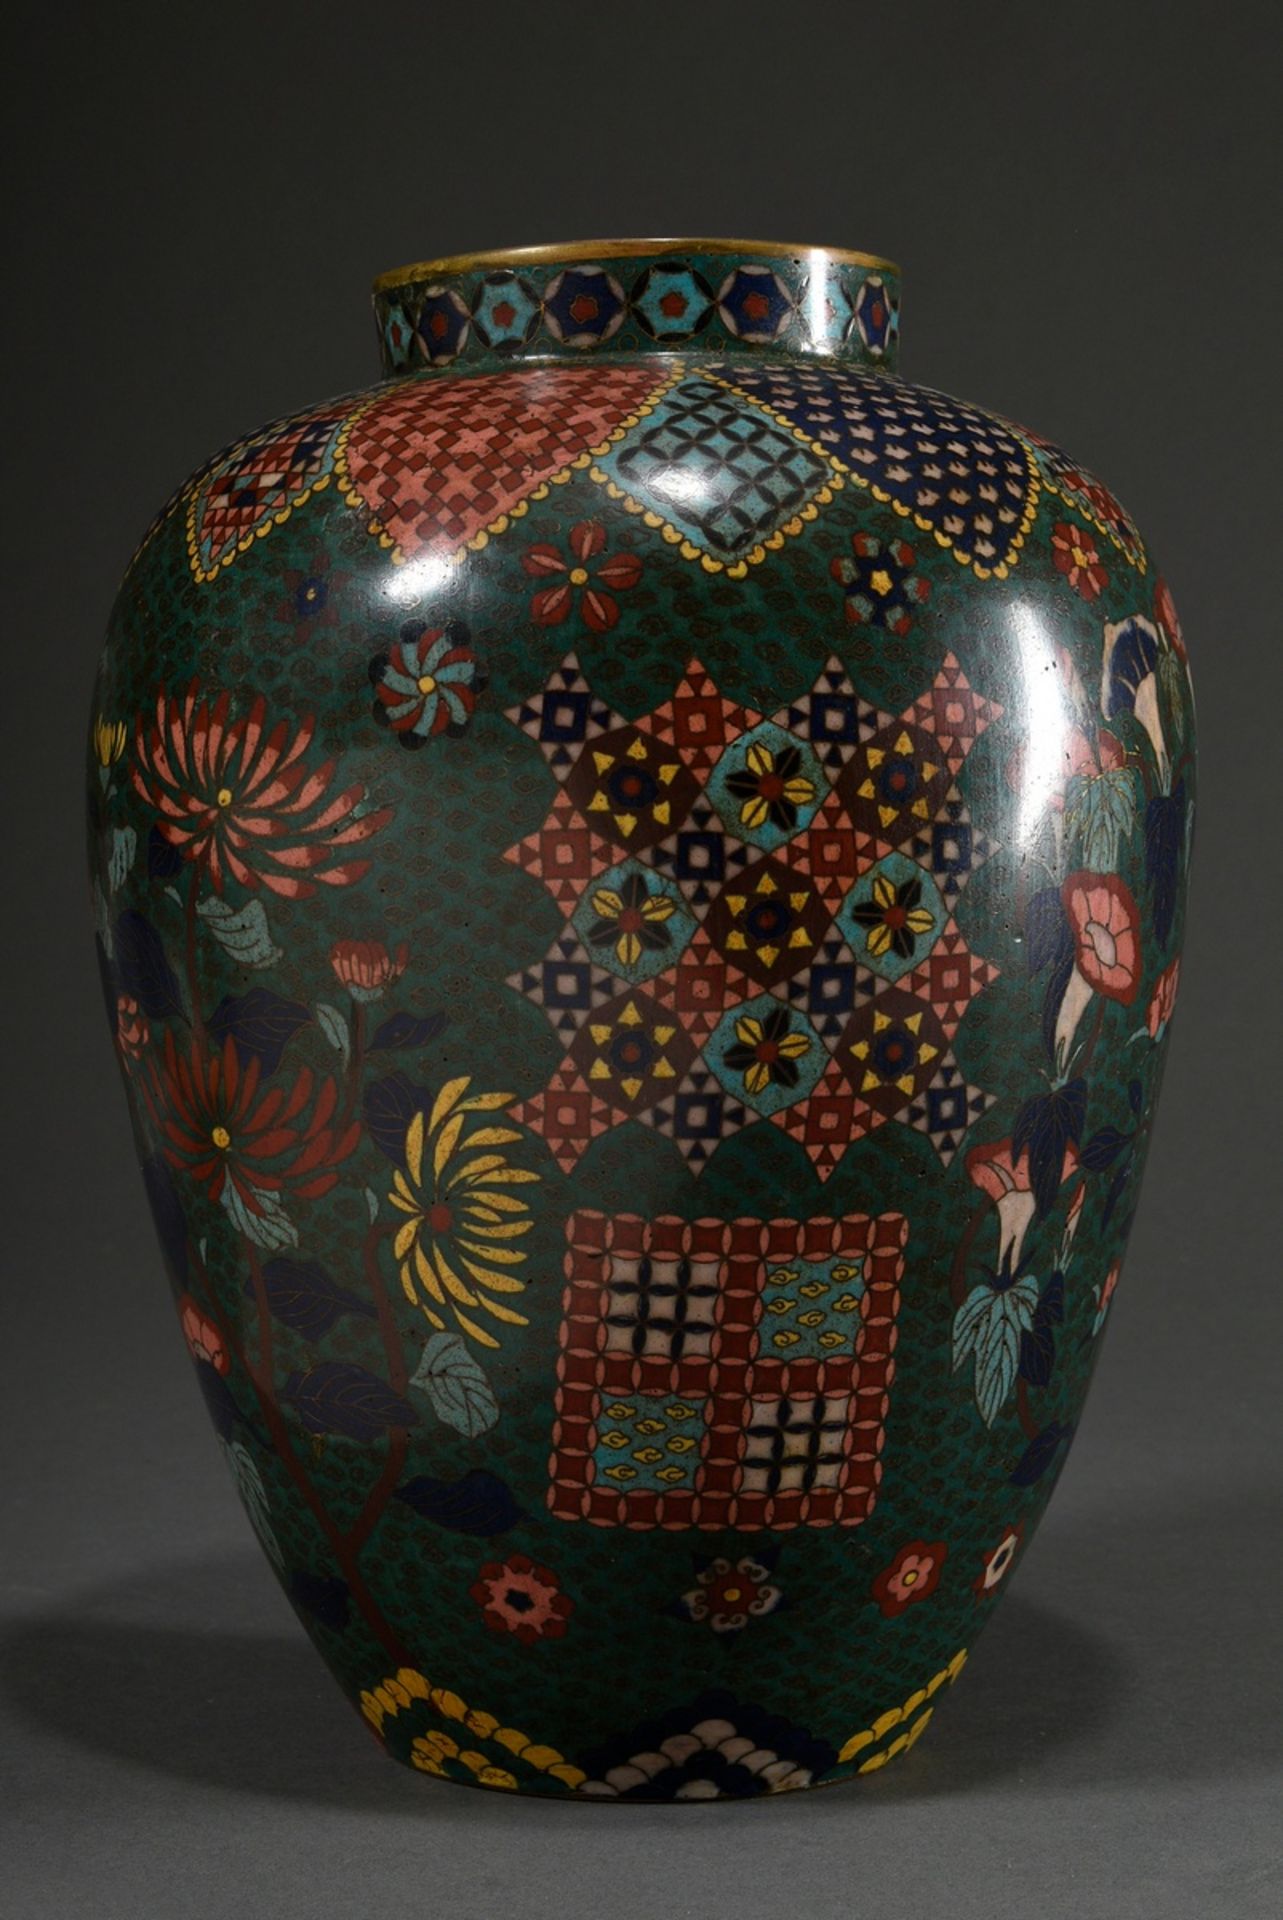 Large cloisonné shoulder vase with floral and geometric decoration in dark shades on a dark green b - Image 2 of 7